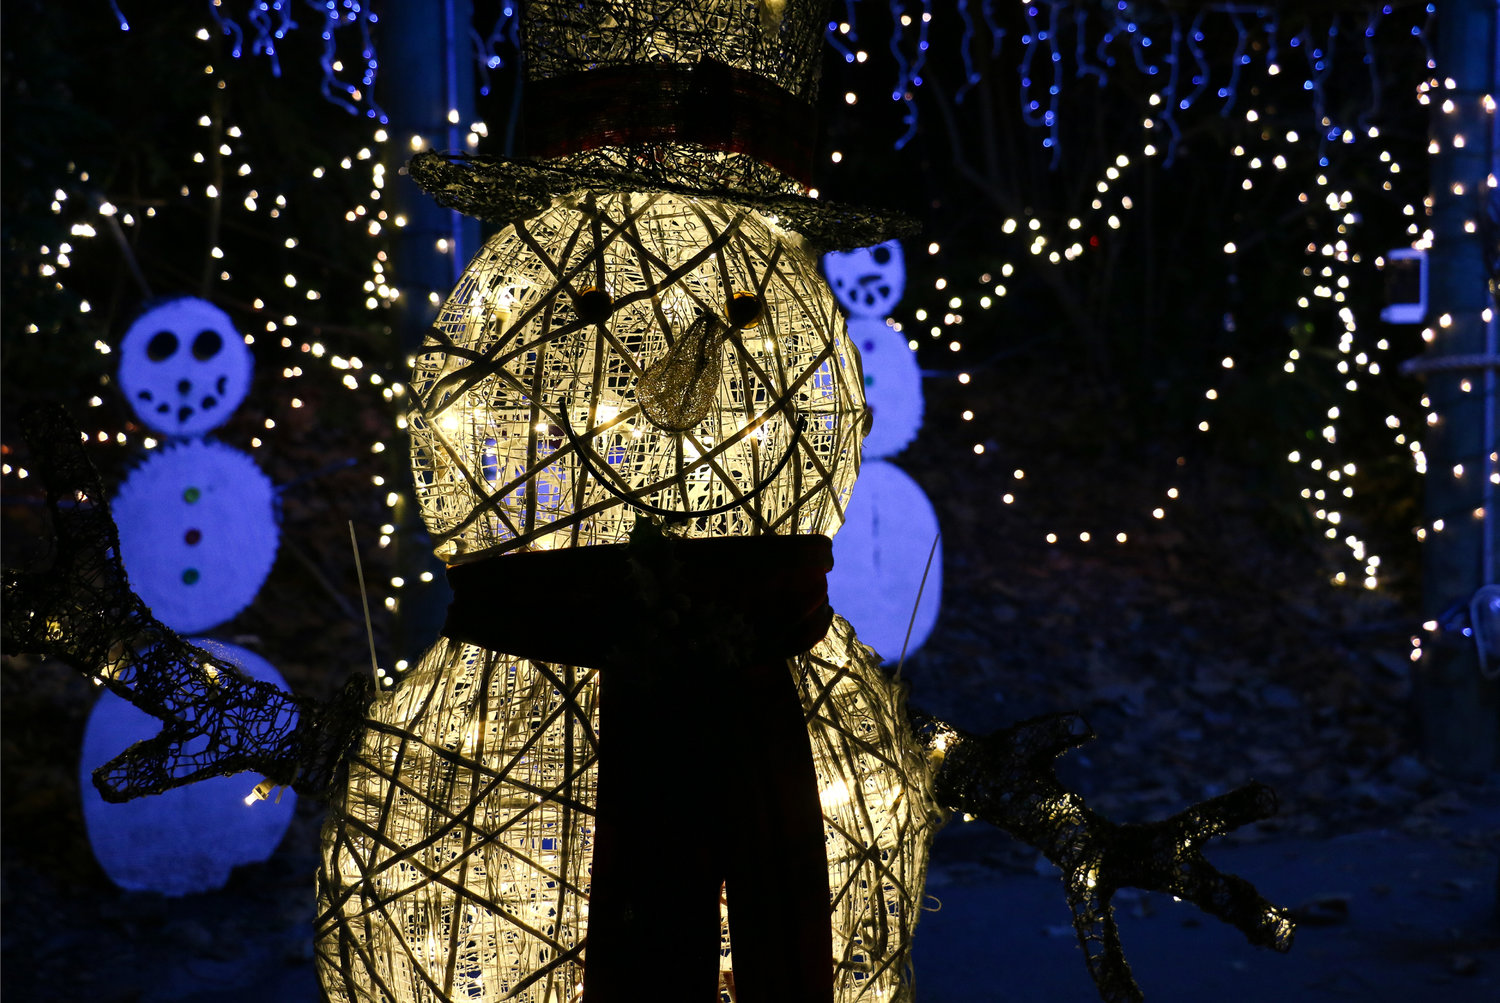 Holiday Lights Spectacular at Roger Williams Park Zoo